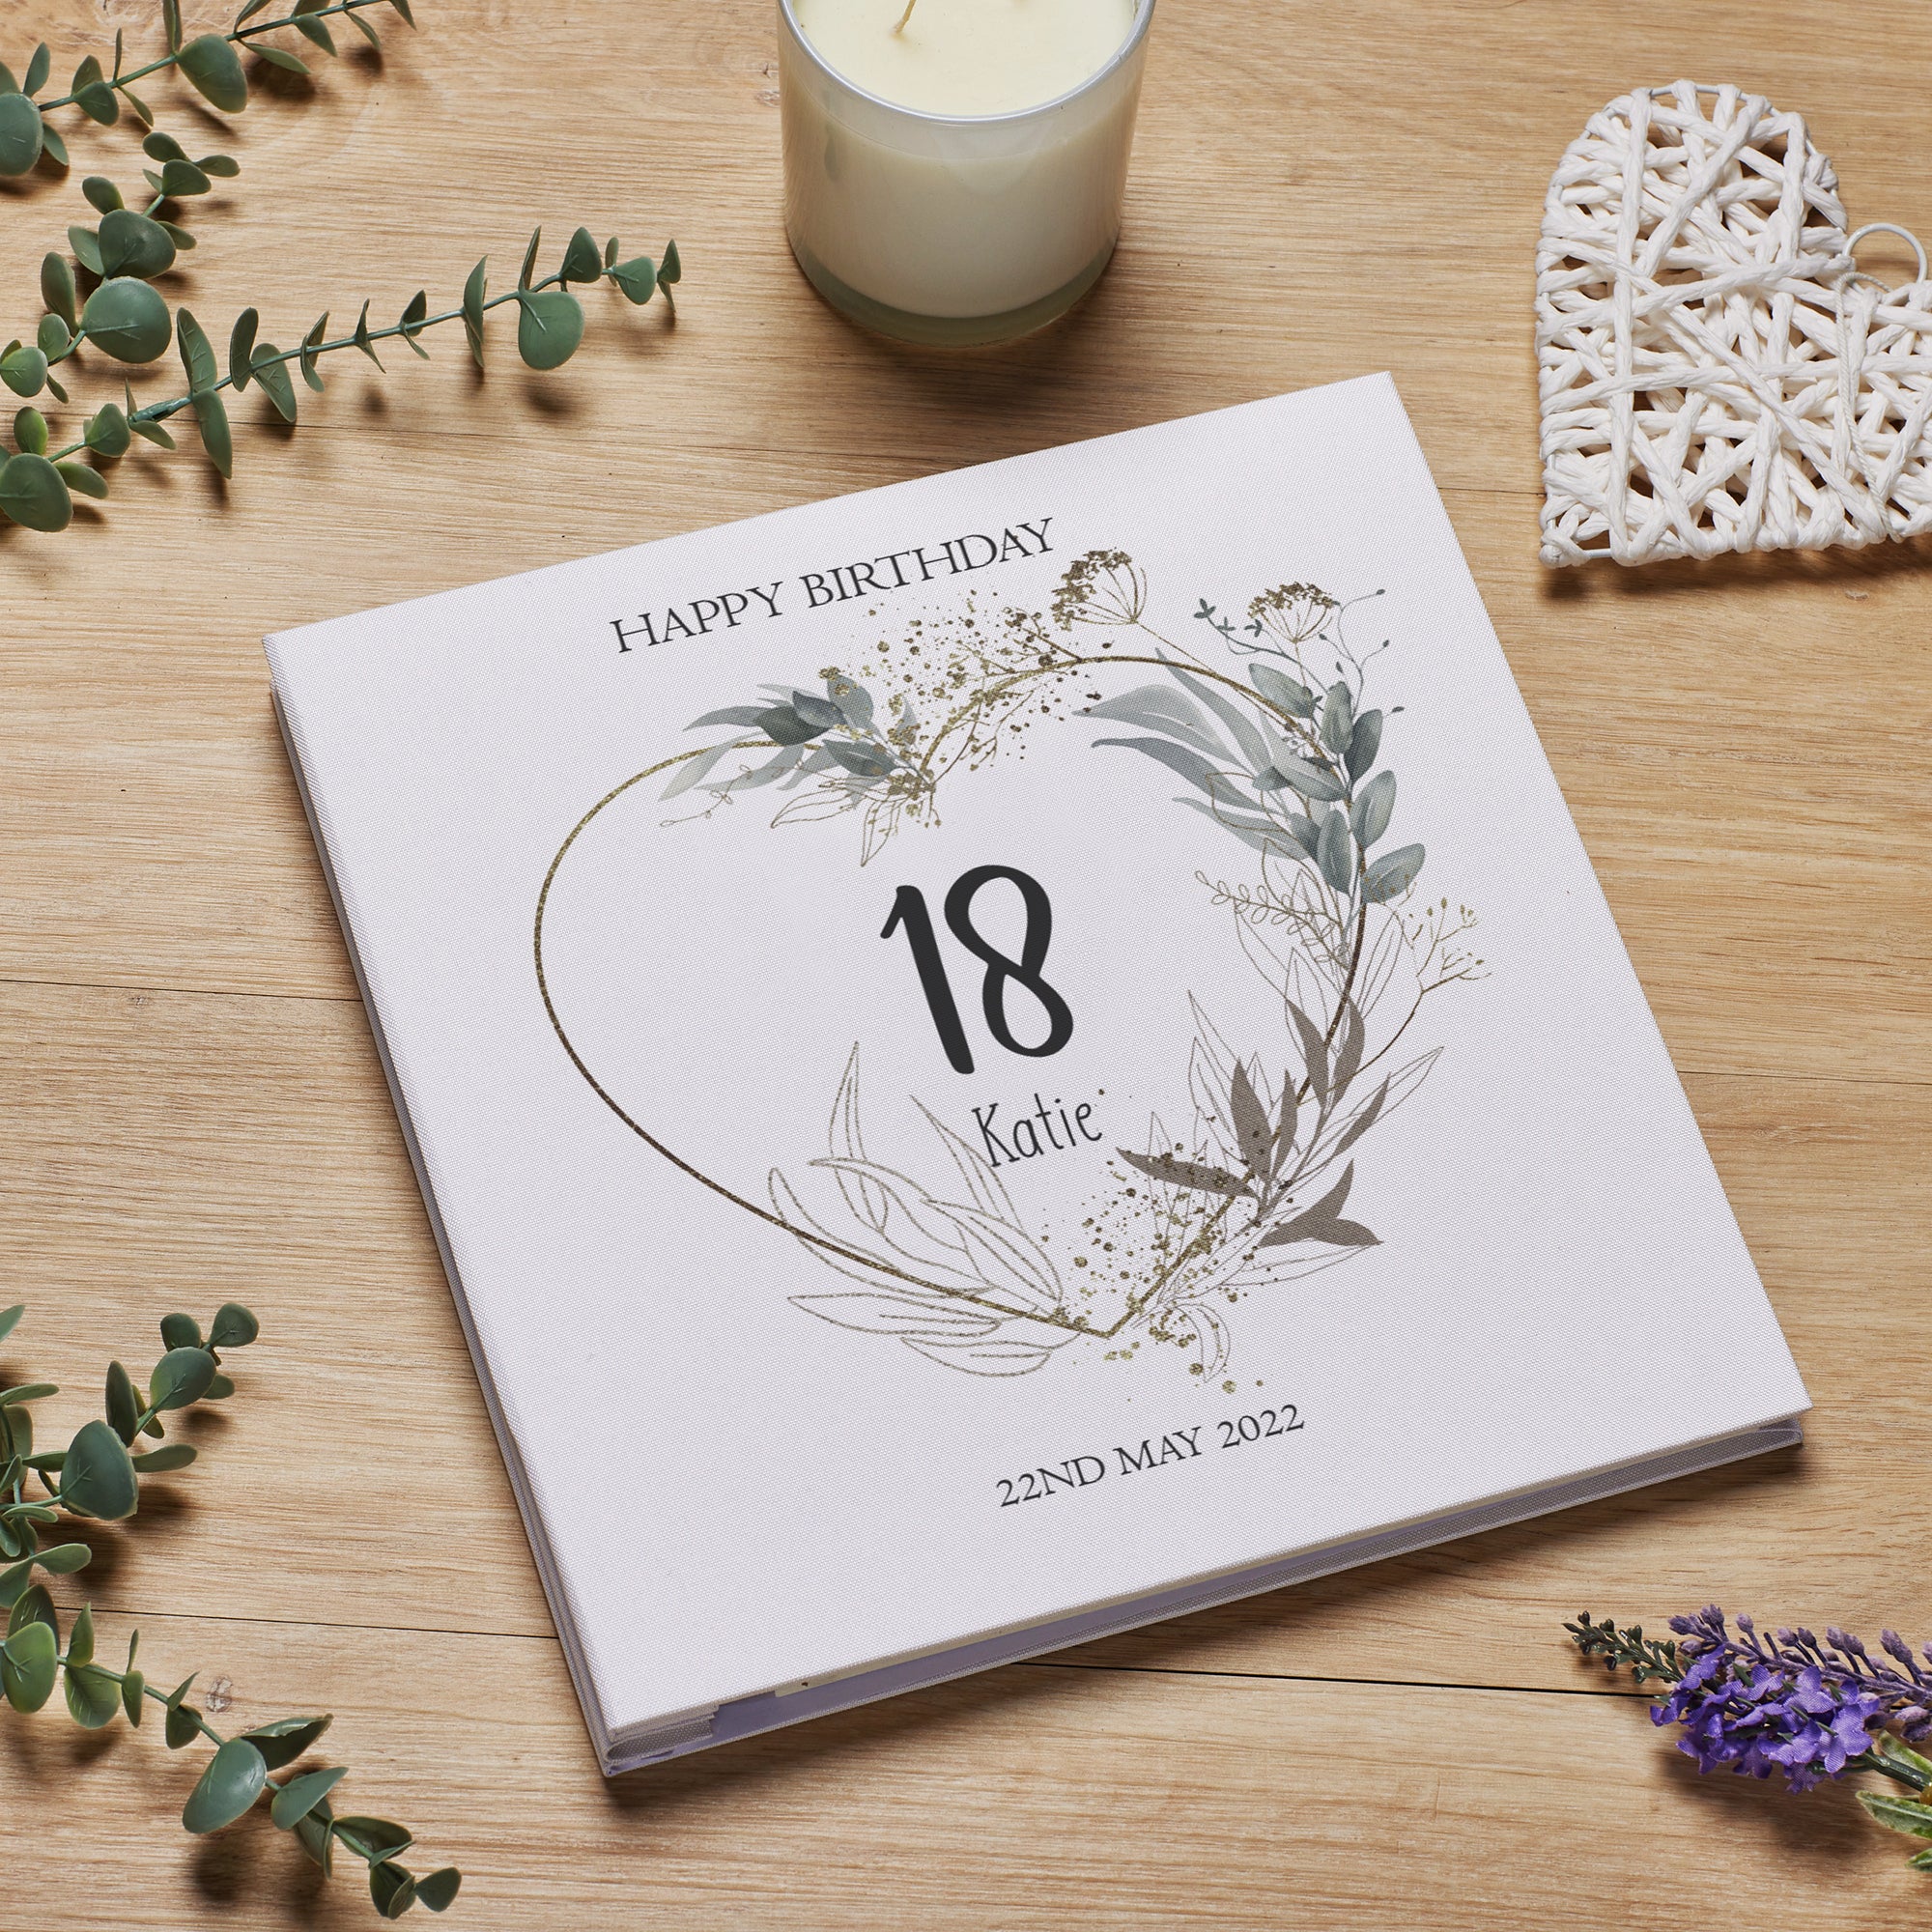 Personalised Large Birthday Photo Album Linen Cover Silver Green Leaf Heart